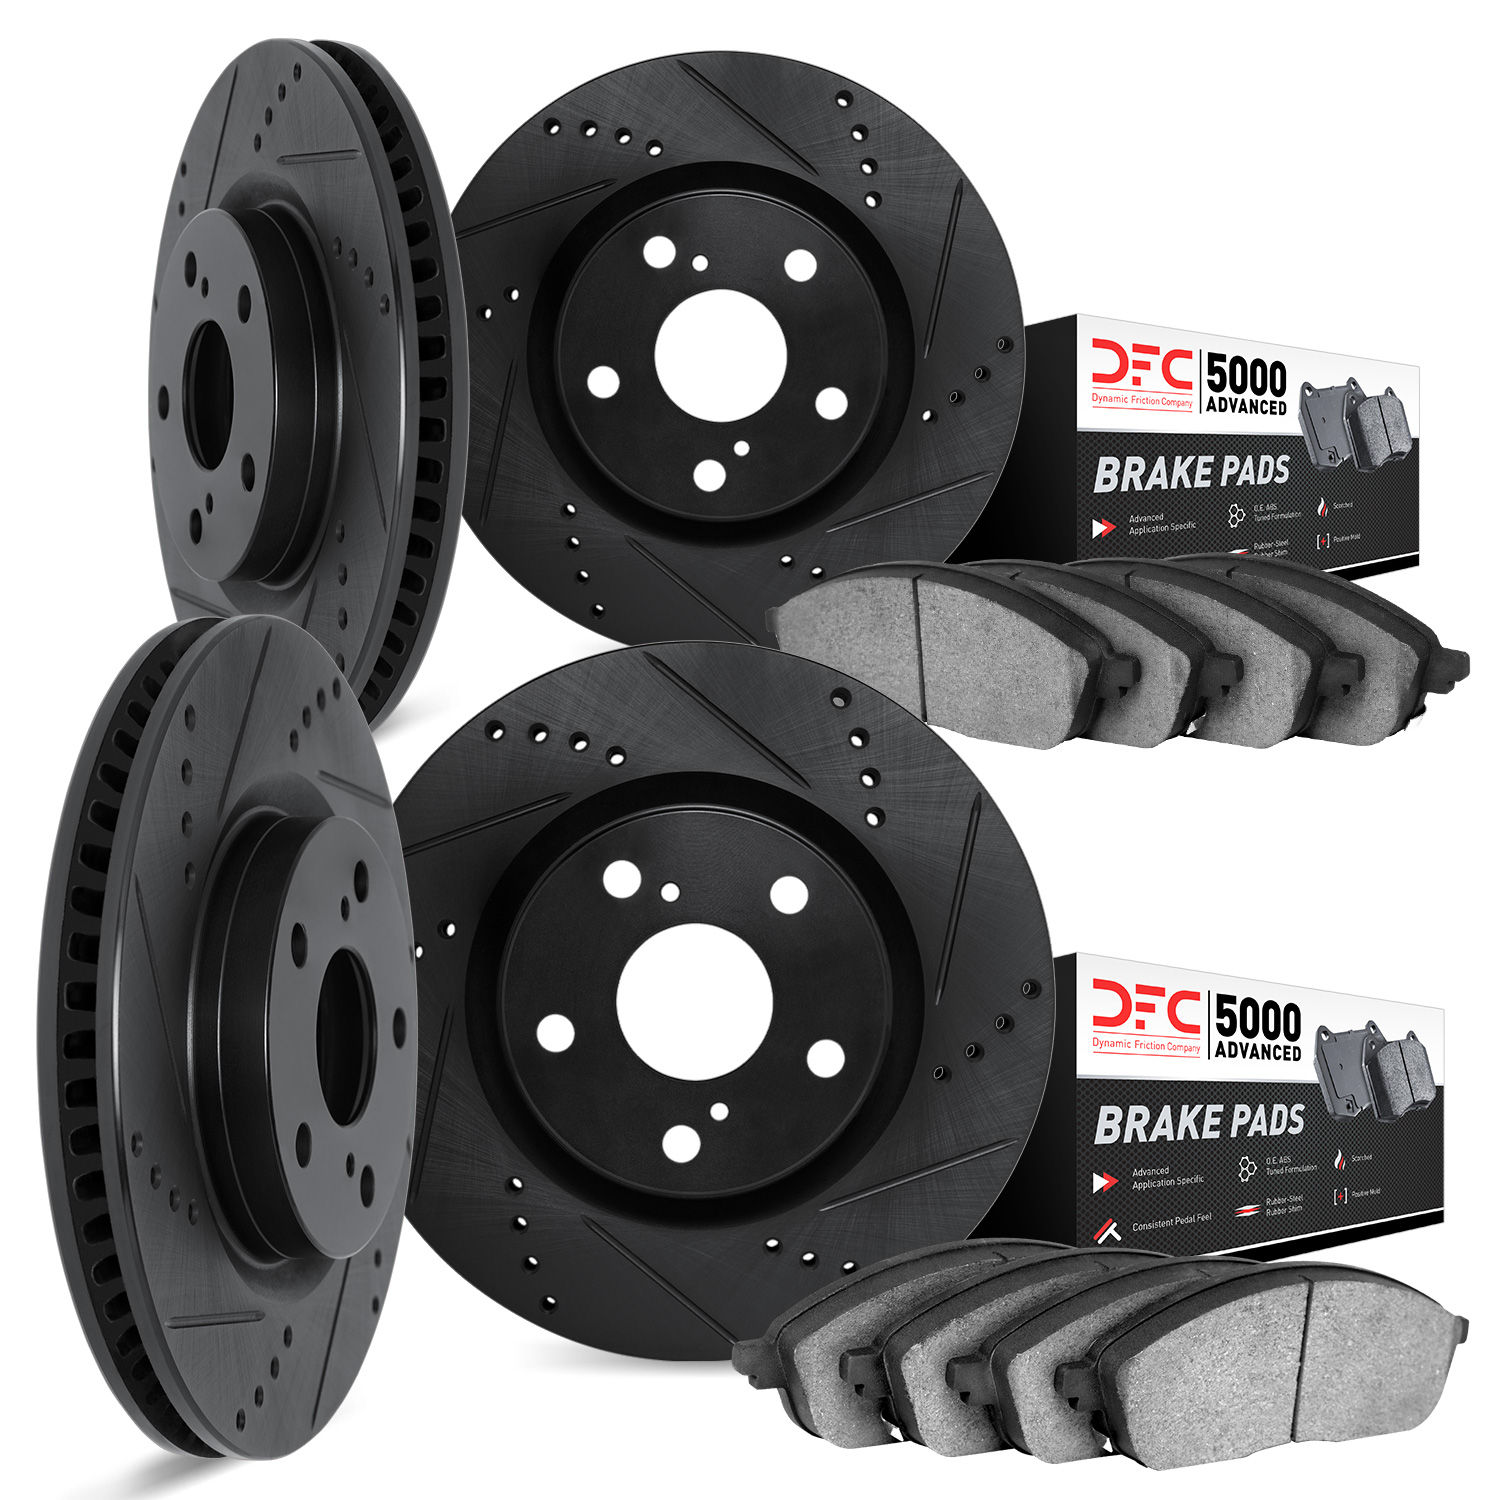 8504-31056 Drilled/Slotted Brake Rotors w/5000 Advanced Brake Pads Kit [Black], 2016-2020 BMW, Position: Front and Rear